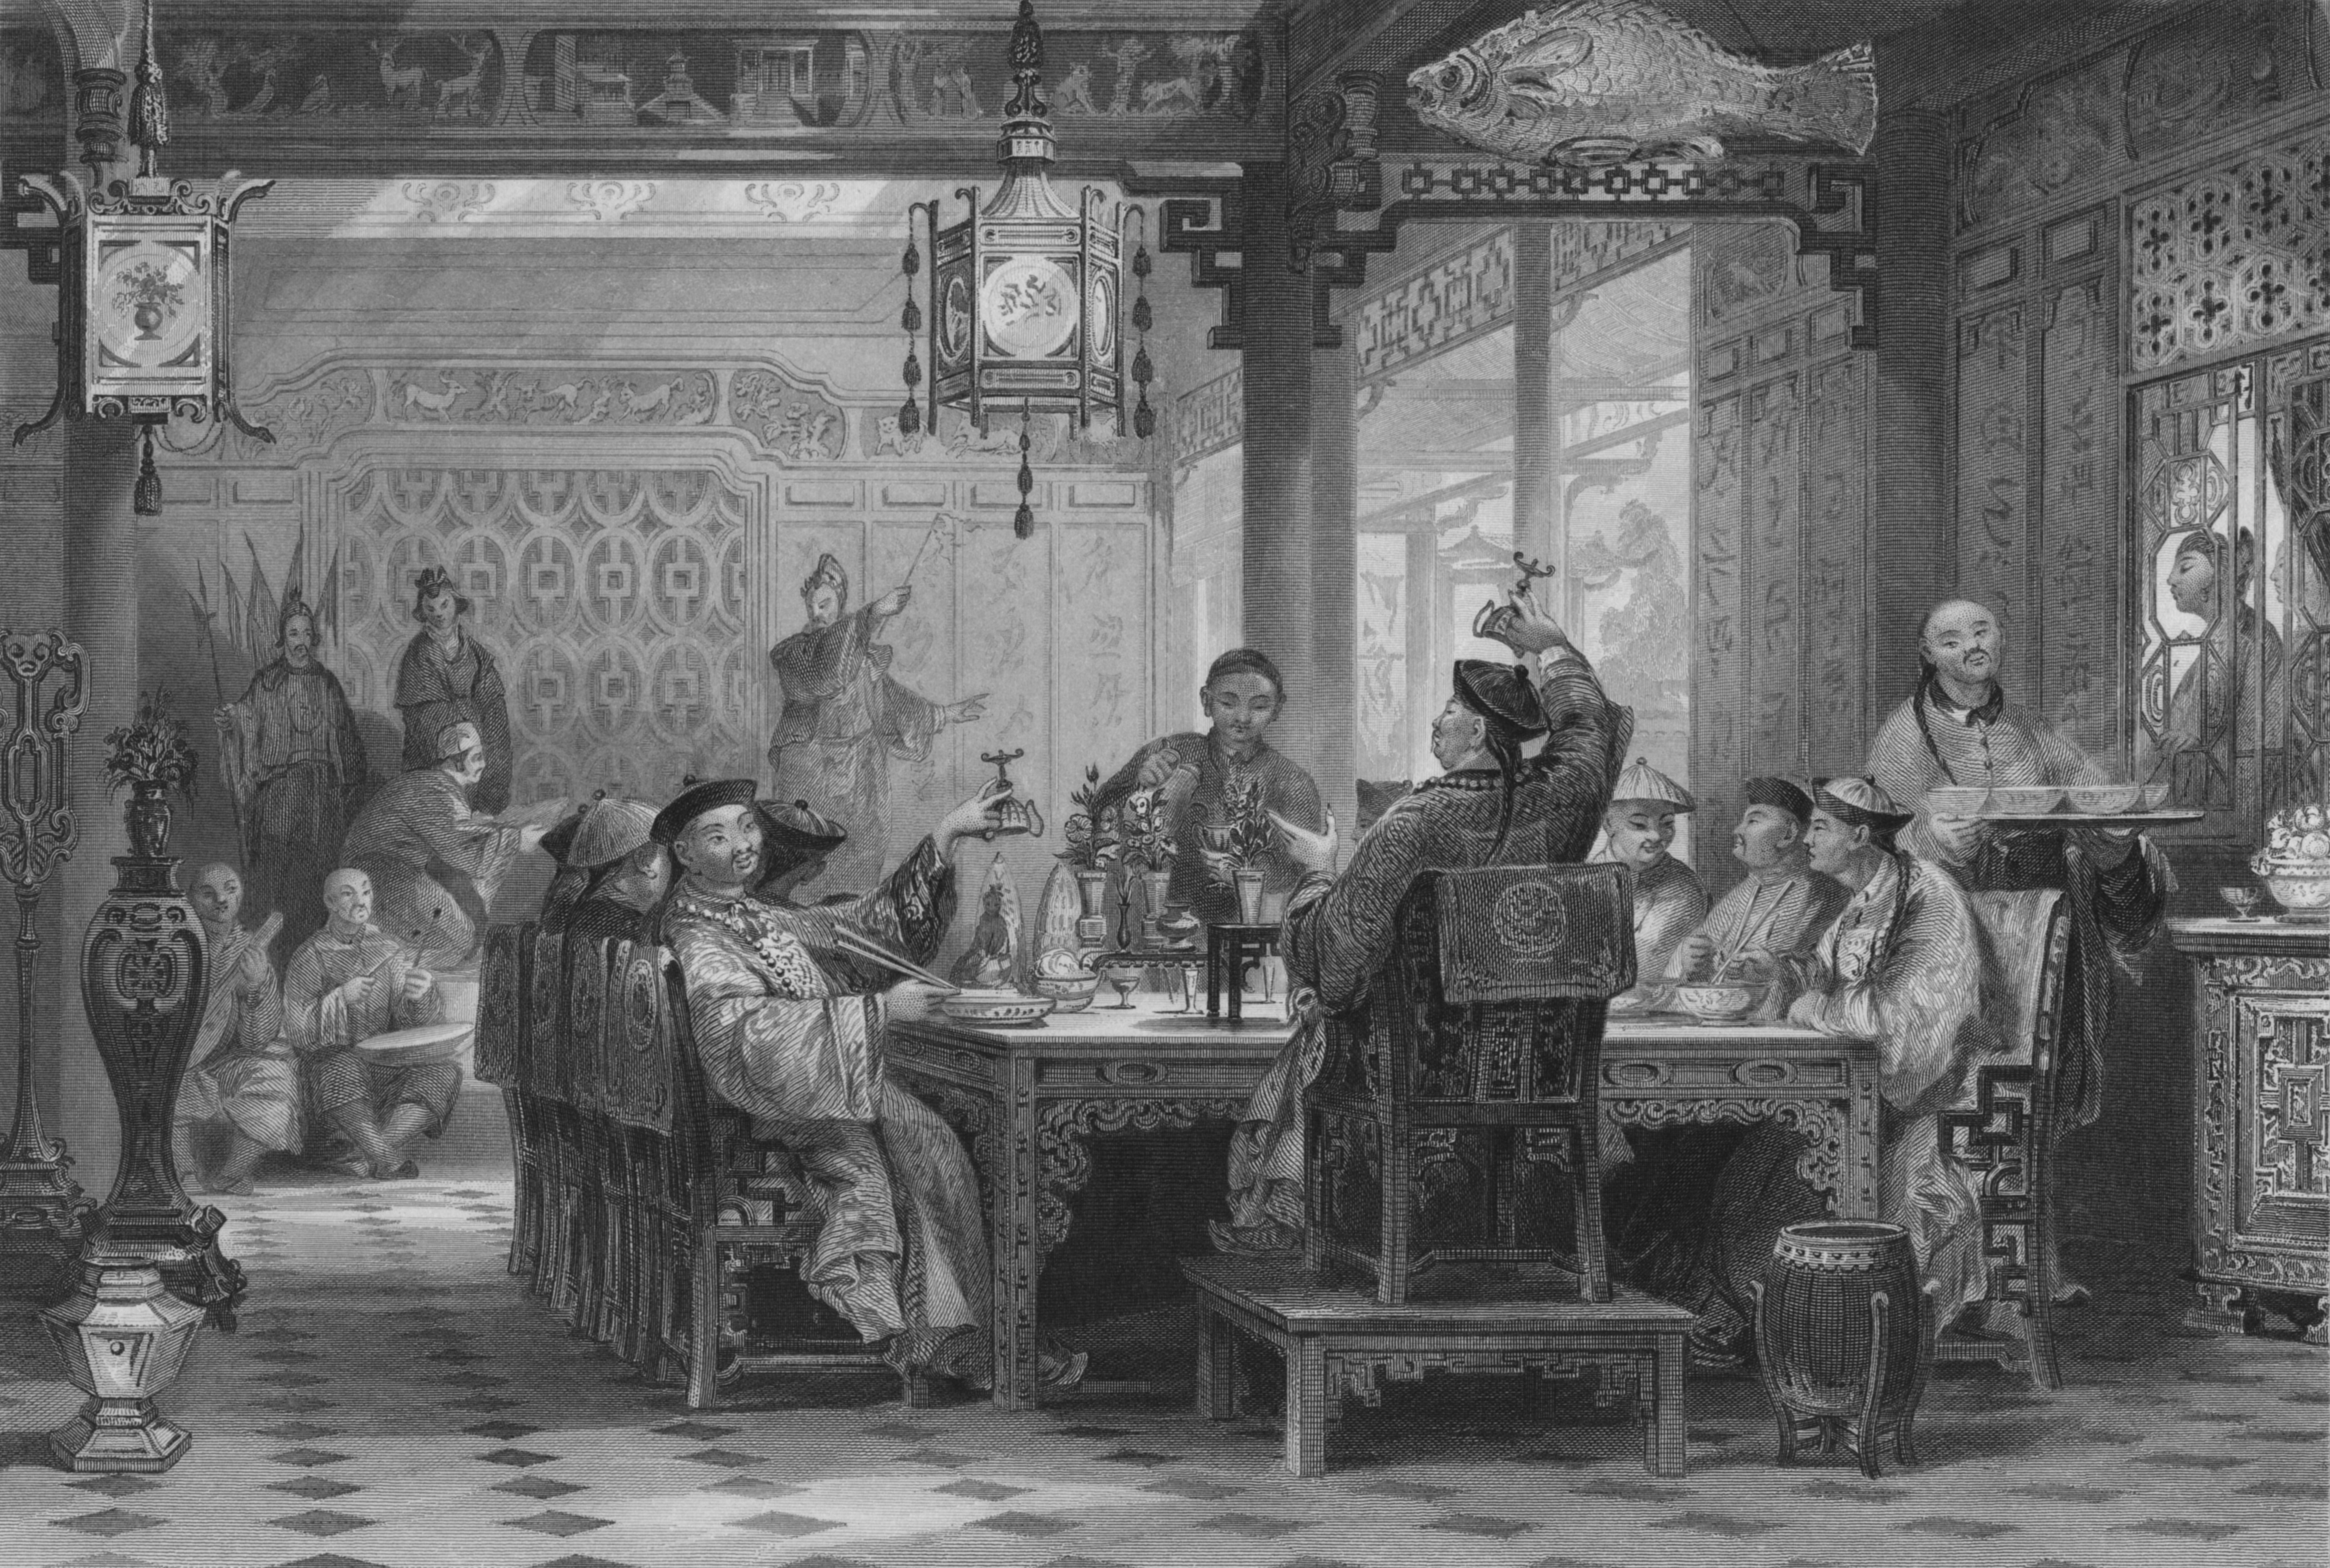 Dinner Party at a Mandarin’s House (1843) by G Paterson. Toasting has long been an important part of Chinese culture. Image: Getty Images